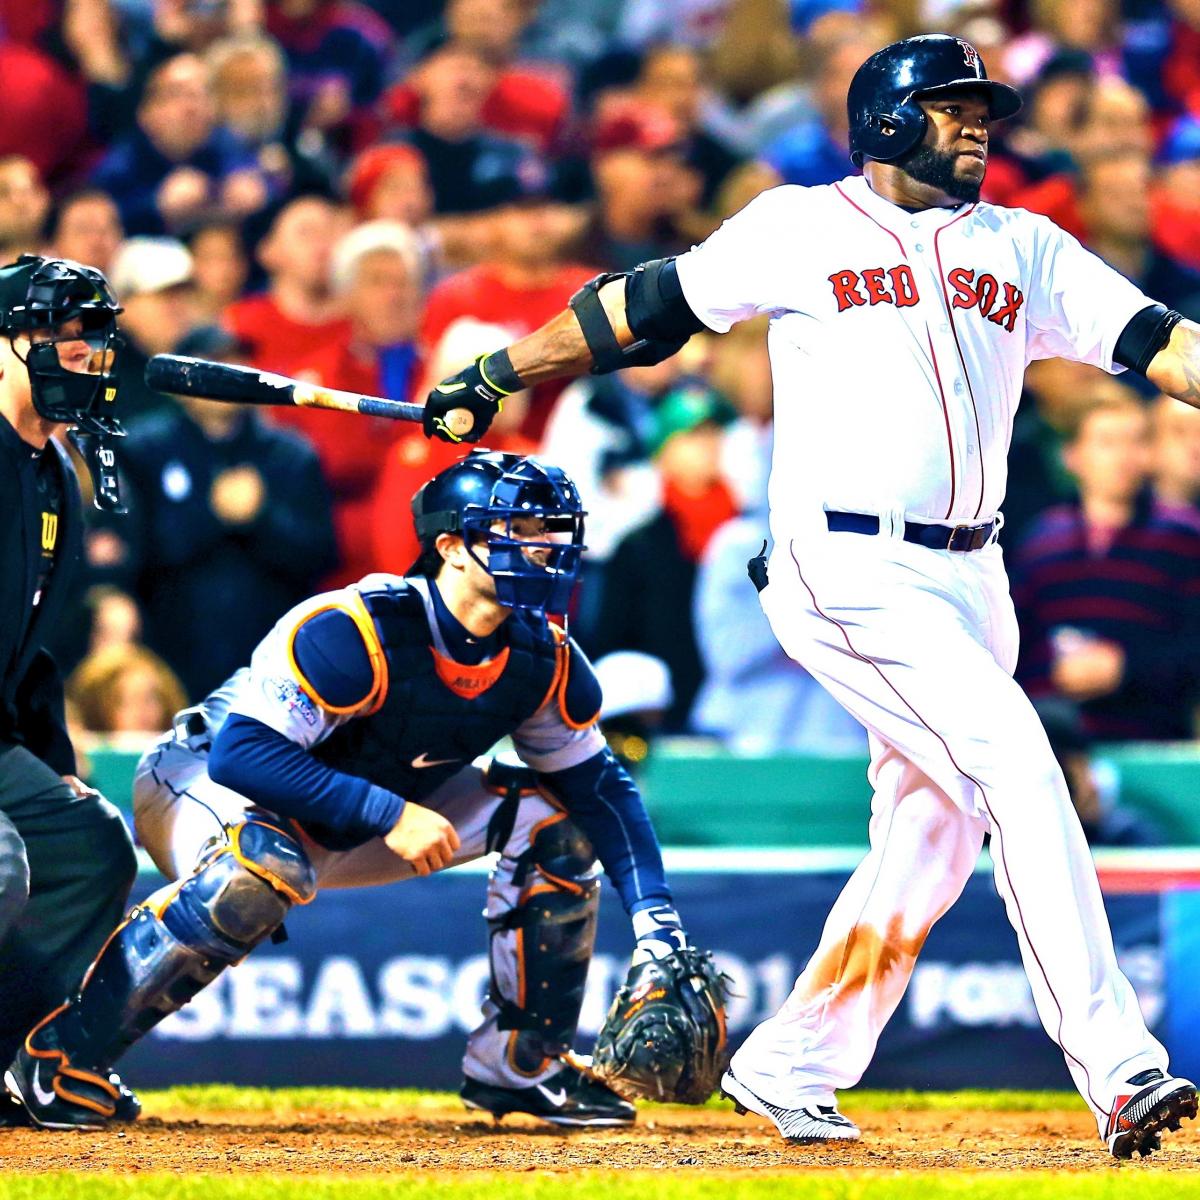 Detroit Tigers vs. Boston Red Sox Score, Grades and Analysis for ALCS